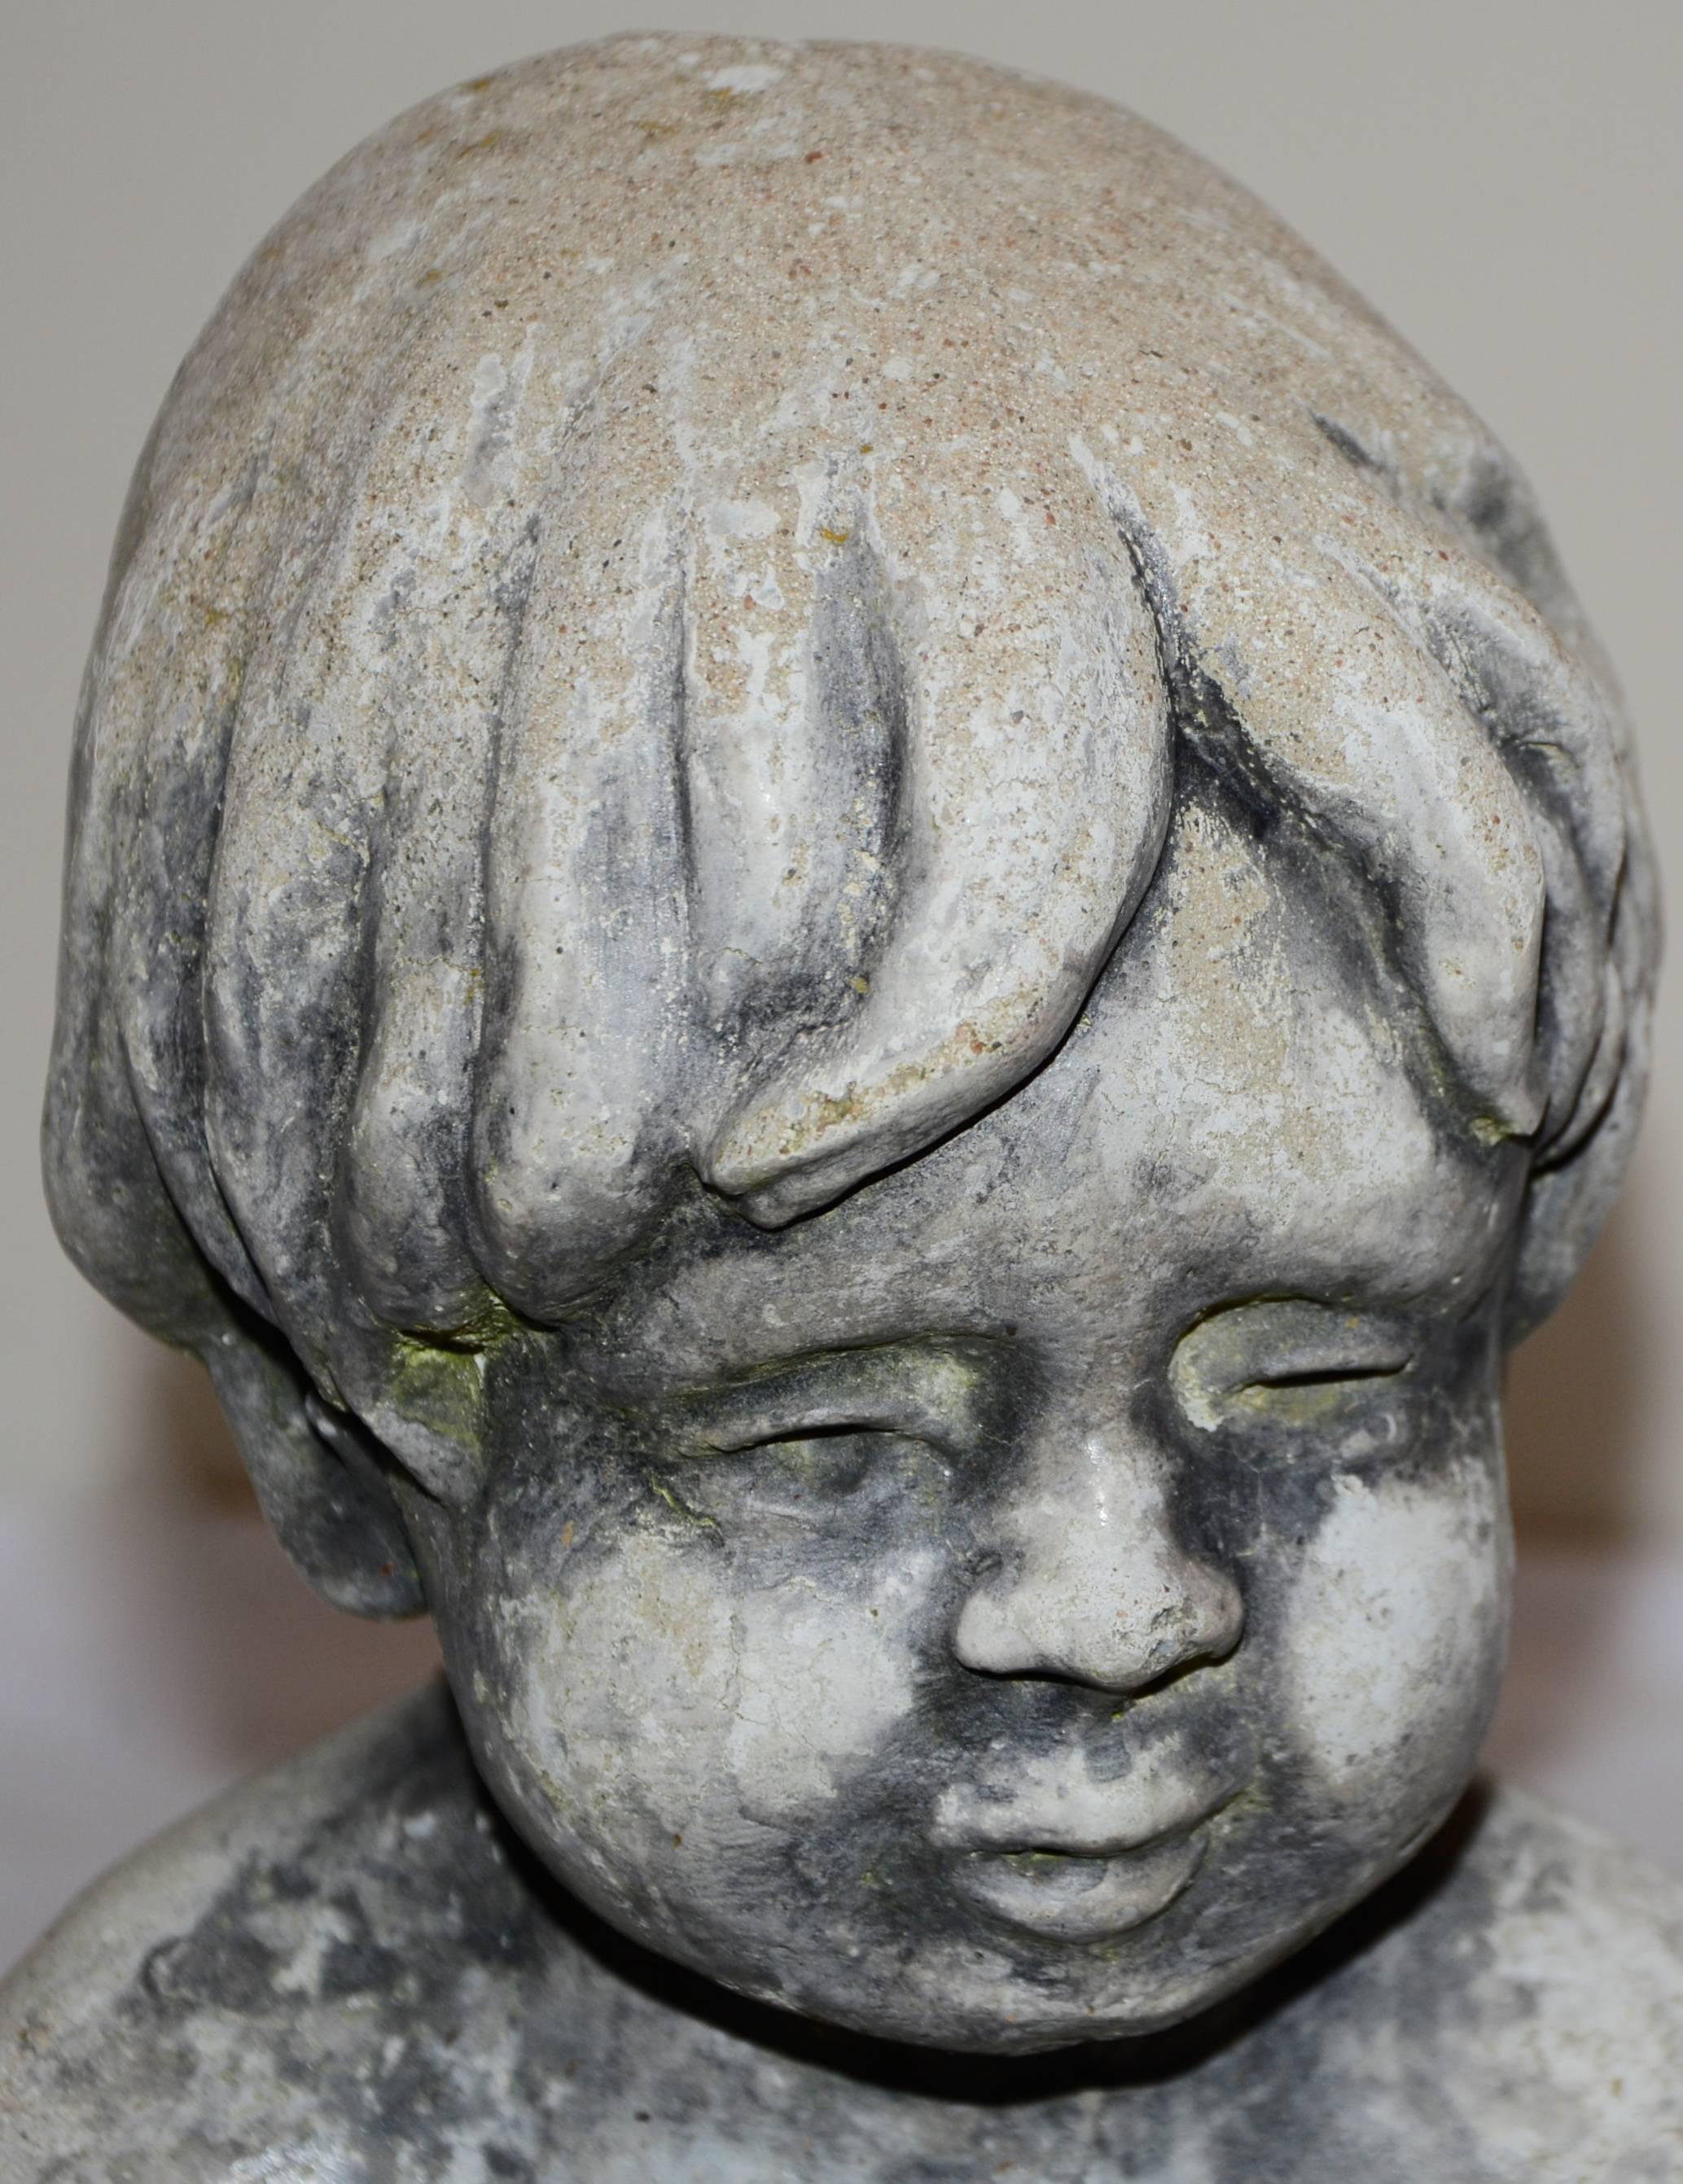 The child starring in this concrete statue will melt your heart. He is affectionately petting two little bunnies in his lap. The aged patina gives this a fabulous appearance. This will be a great addition to your garden!